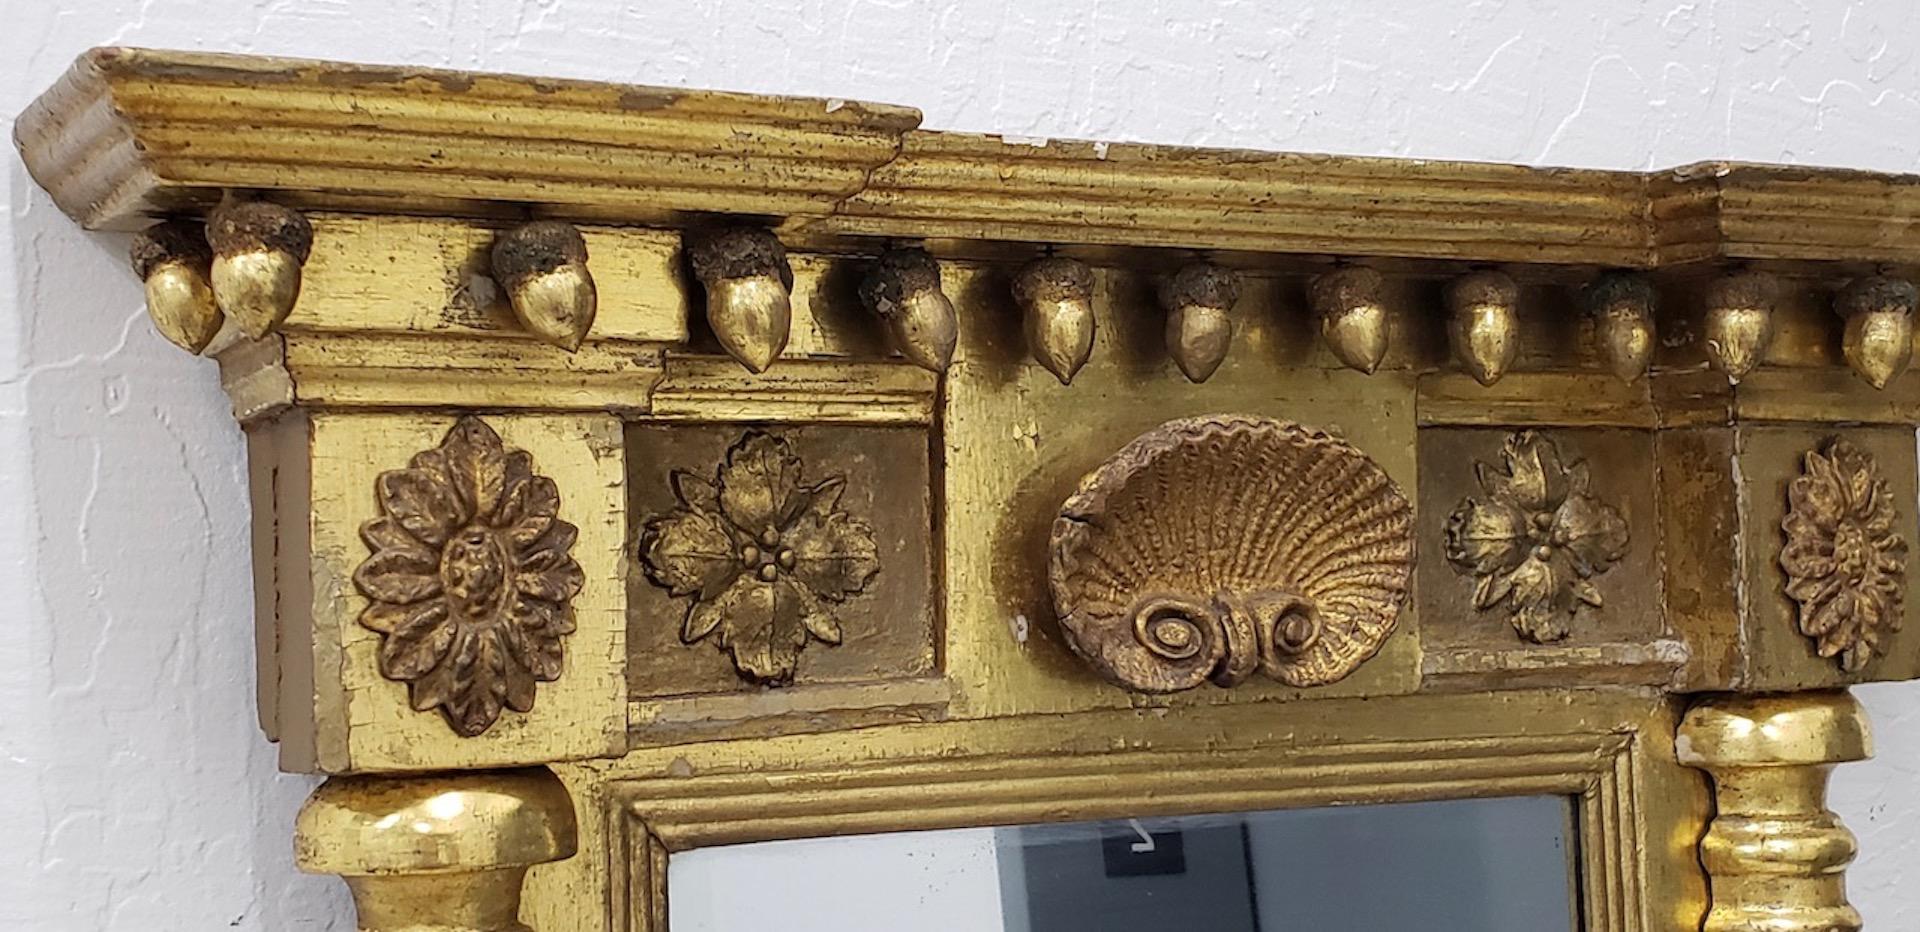 Early 19th century American hand carved and gilded mirror, circa 1820s

Wonderful early American antique mirror. Beautifully carved and gilded. Acorns hang from the top and a shell carving is at the middle. Beautiful twisted columns on each side.